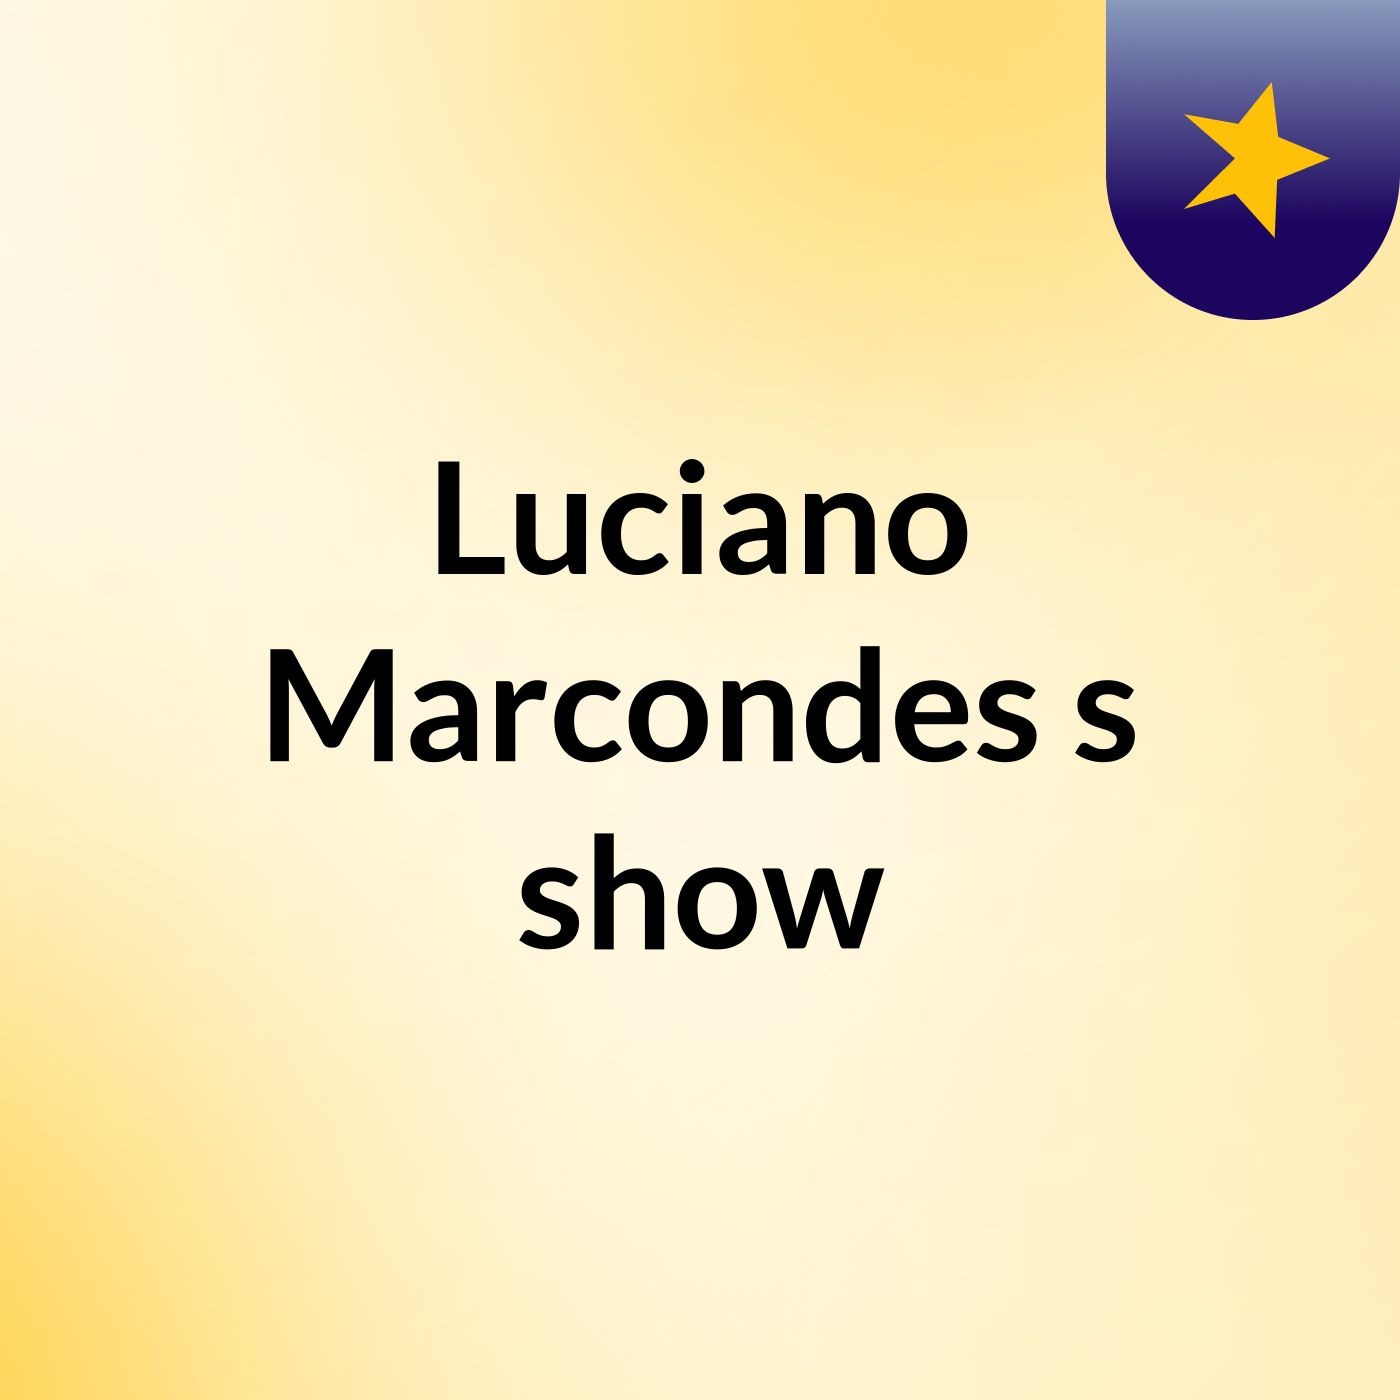 Luciano Marcondes's show